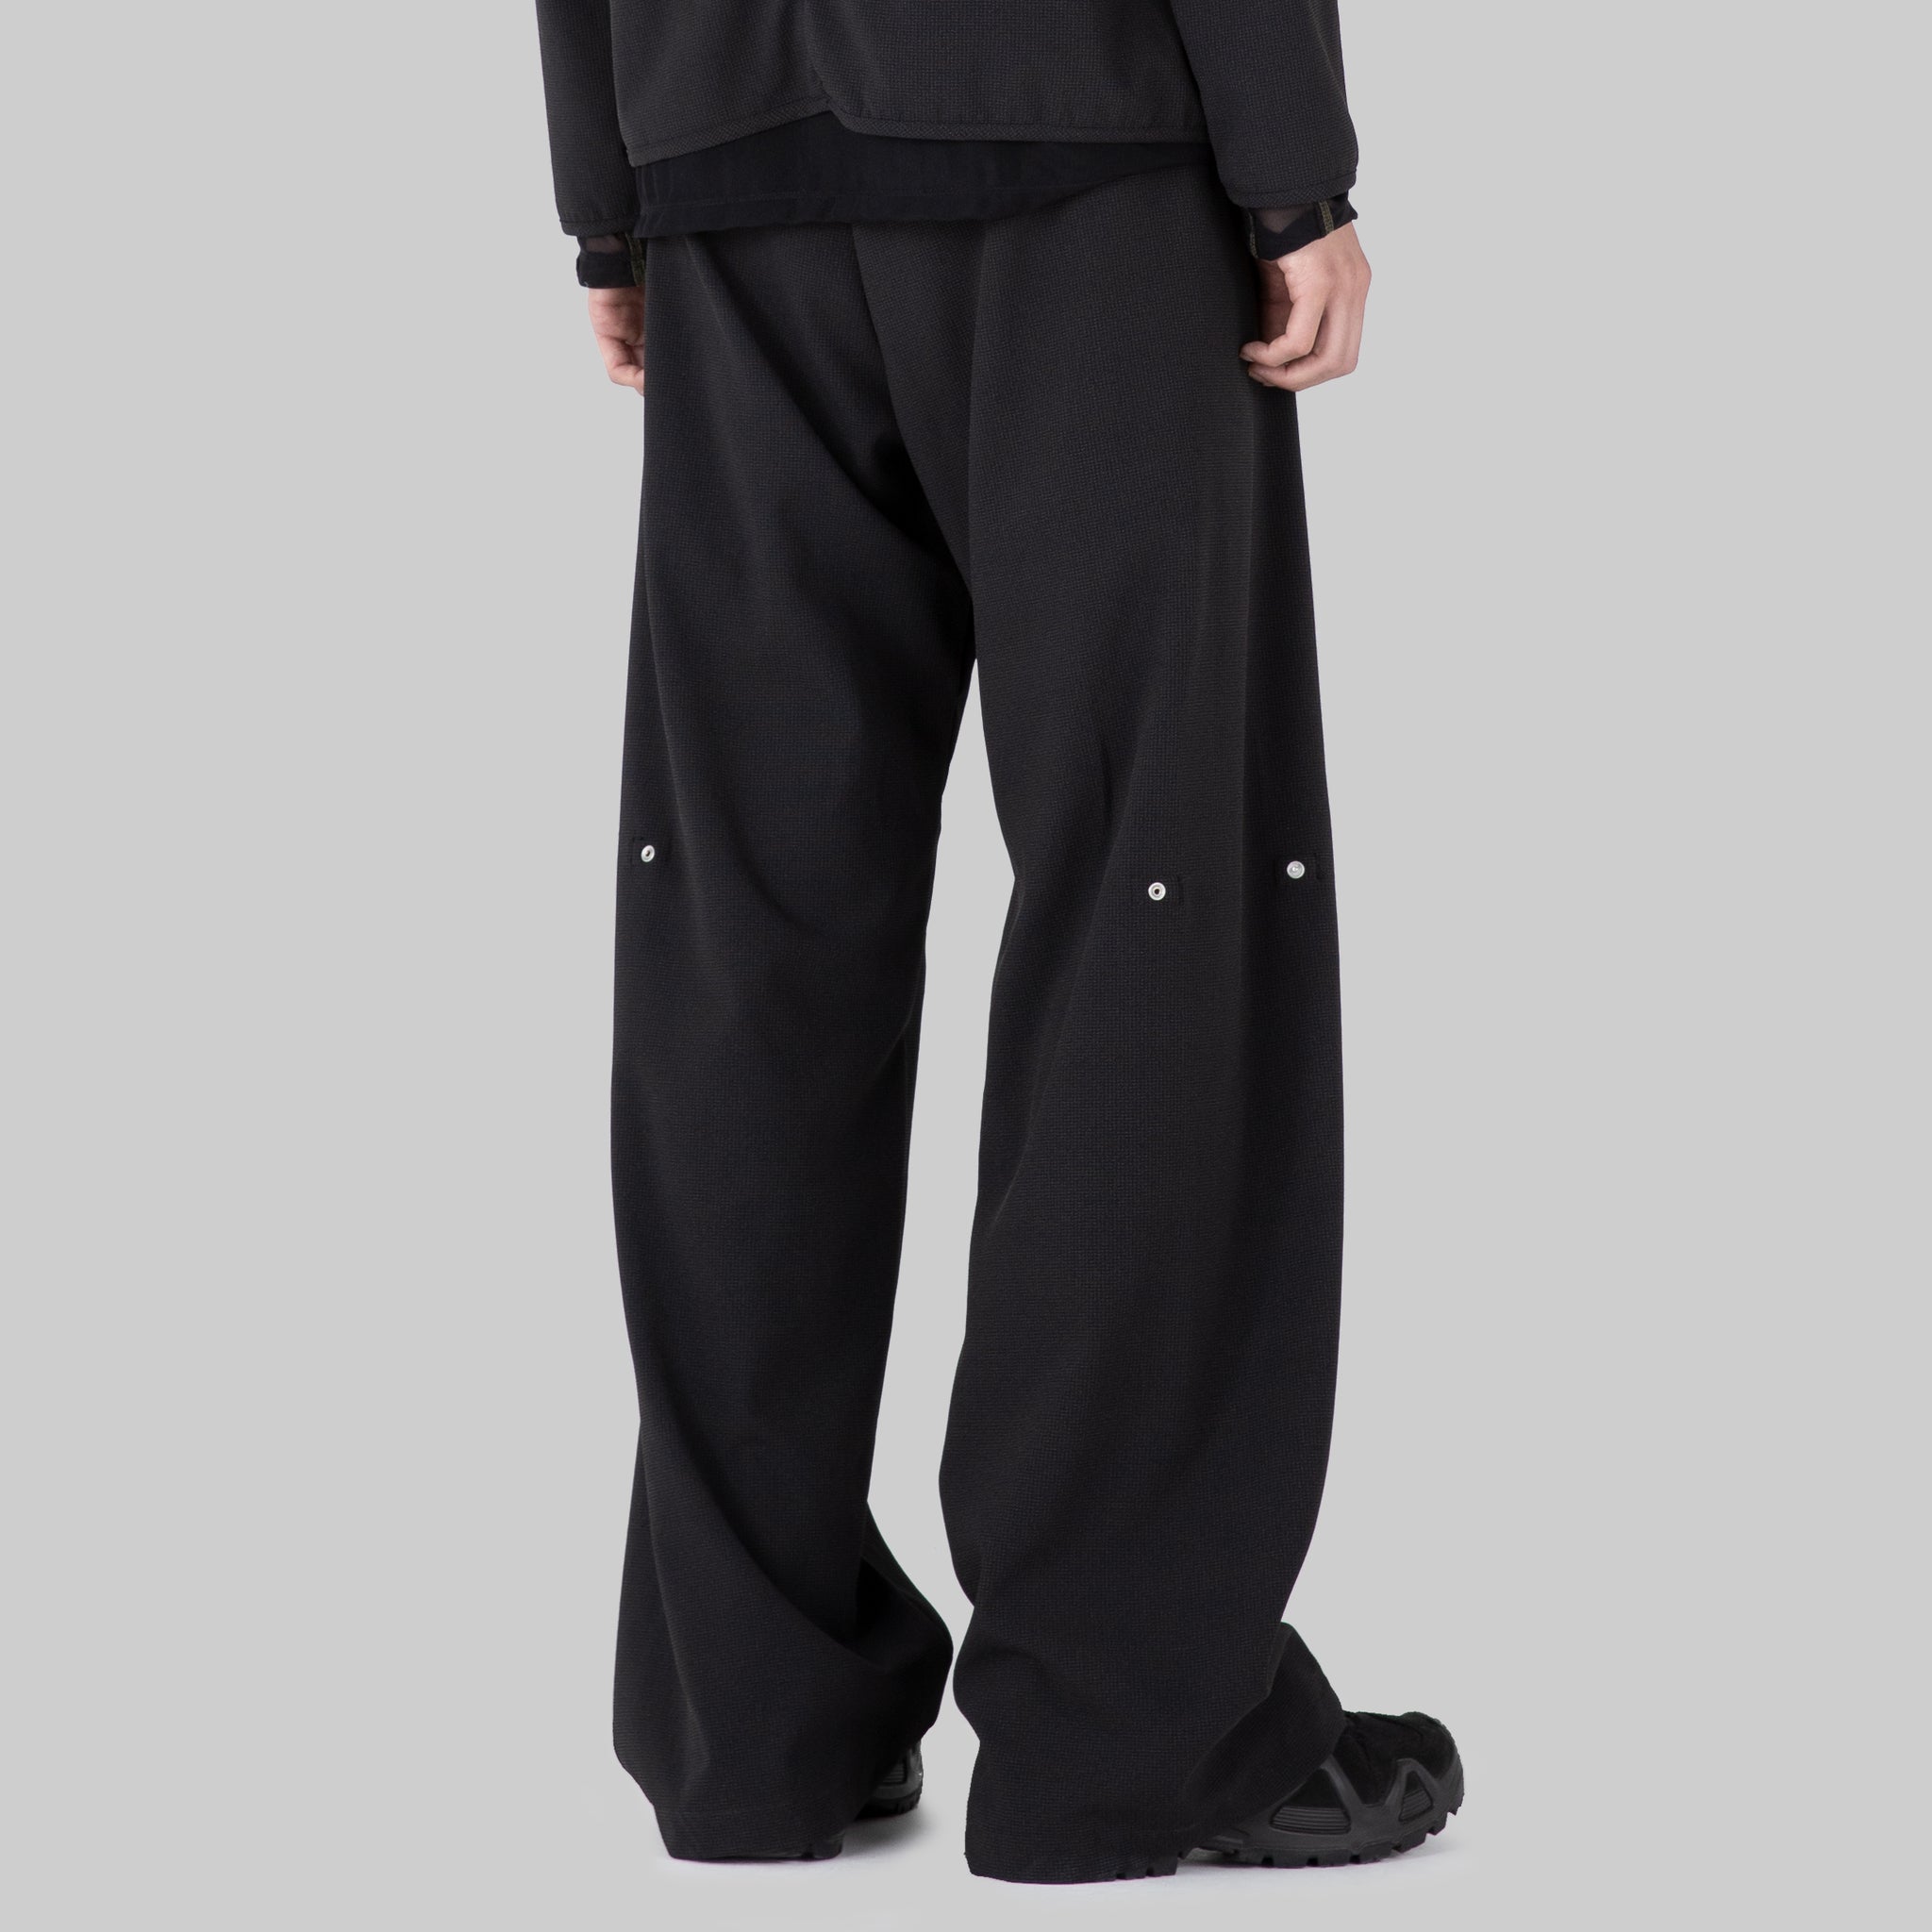 AFFXWRKS CONTRACT PANT LEAD BLACK